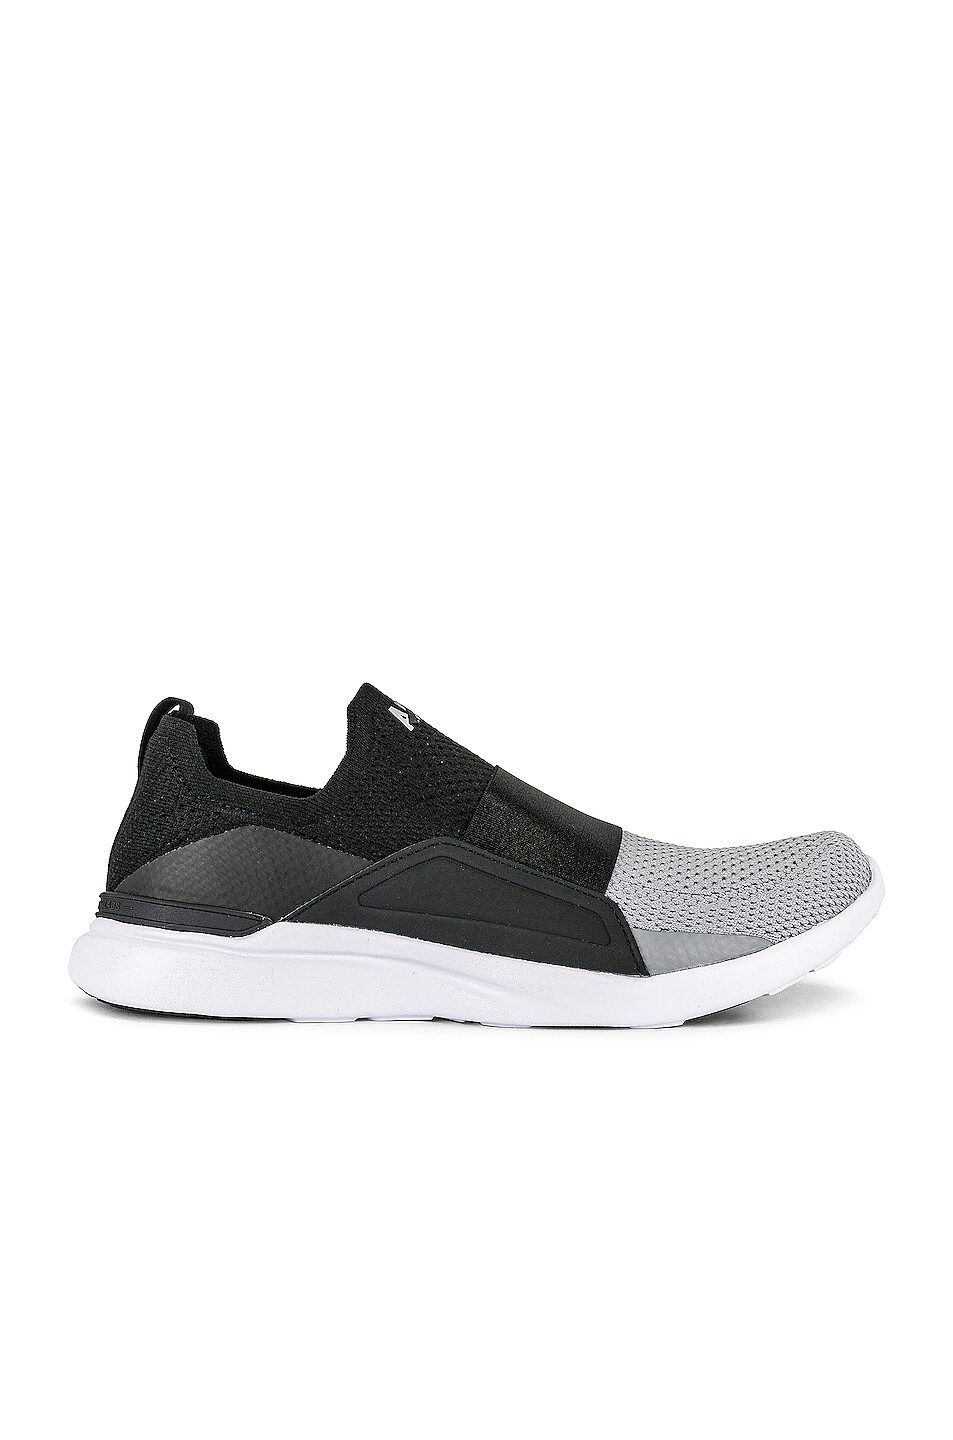 Image 1 of APL: Athletic Propulsion Labs Techloom Bliss in Black, Cement & White